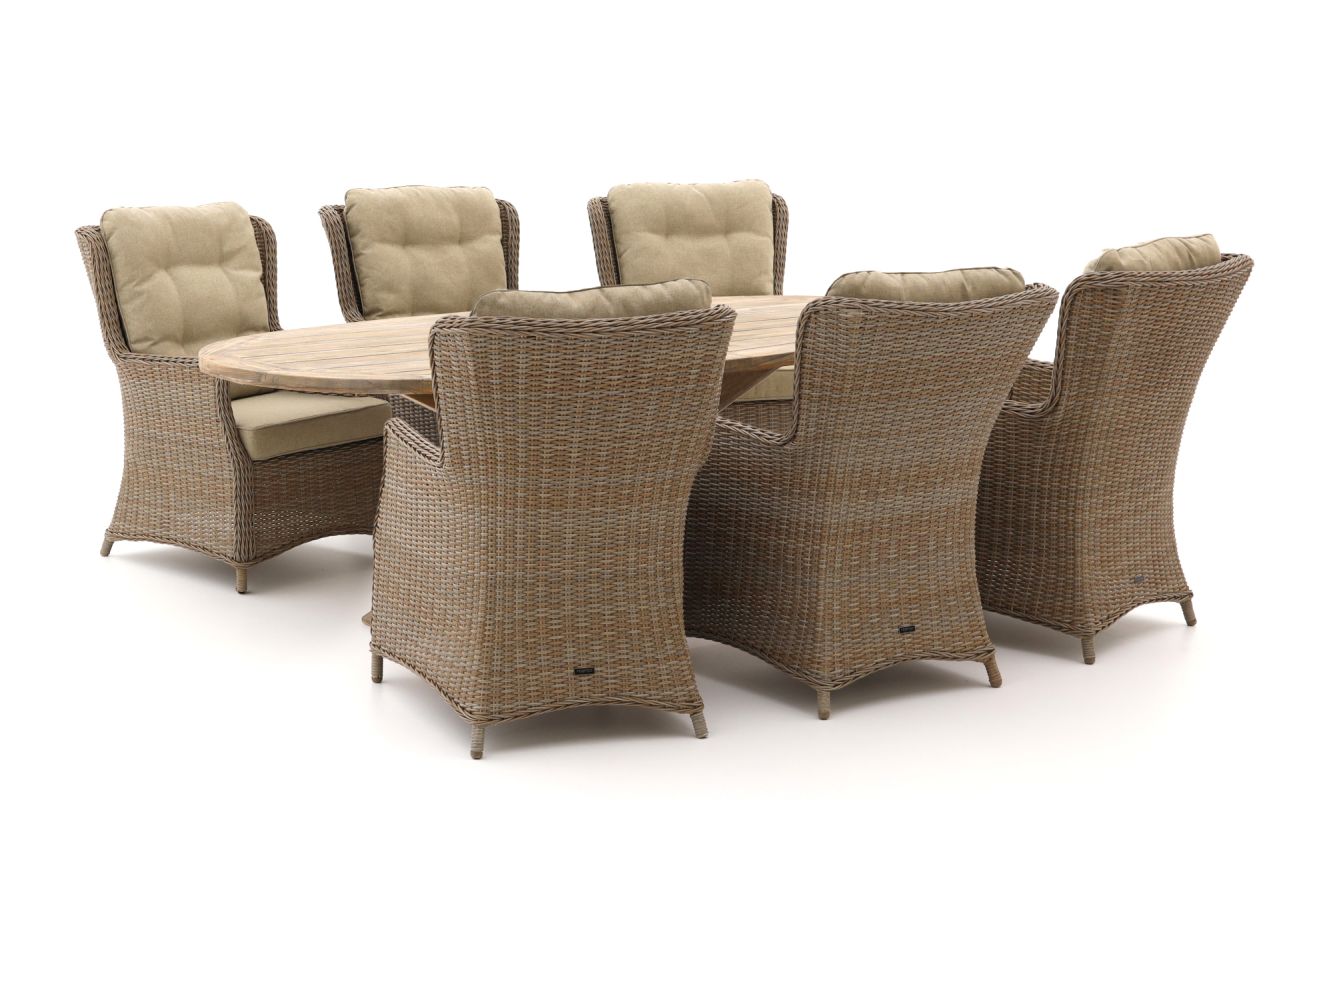 c2322f4256e467b22907a1a901670aab3074510c 124917 p01 wbyrgrxz23xgcdfr - Intenso Milano/ROUGH-Y Ellips 240cm lounge-dining tuinset 7-delig